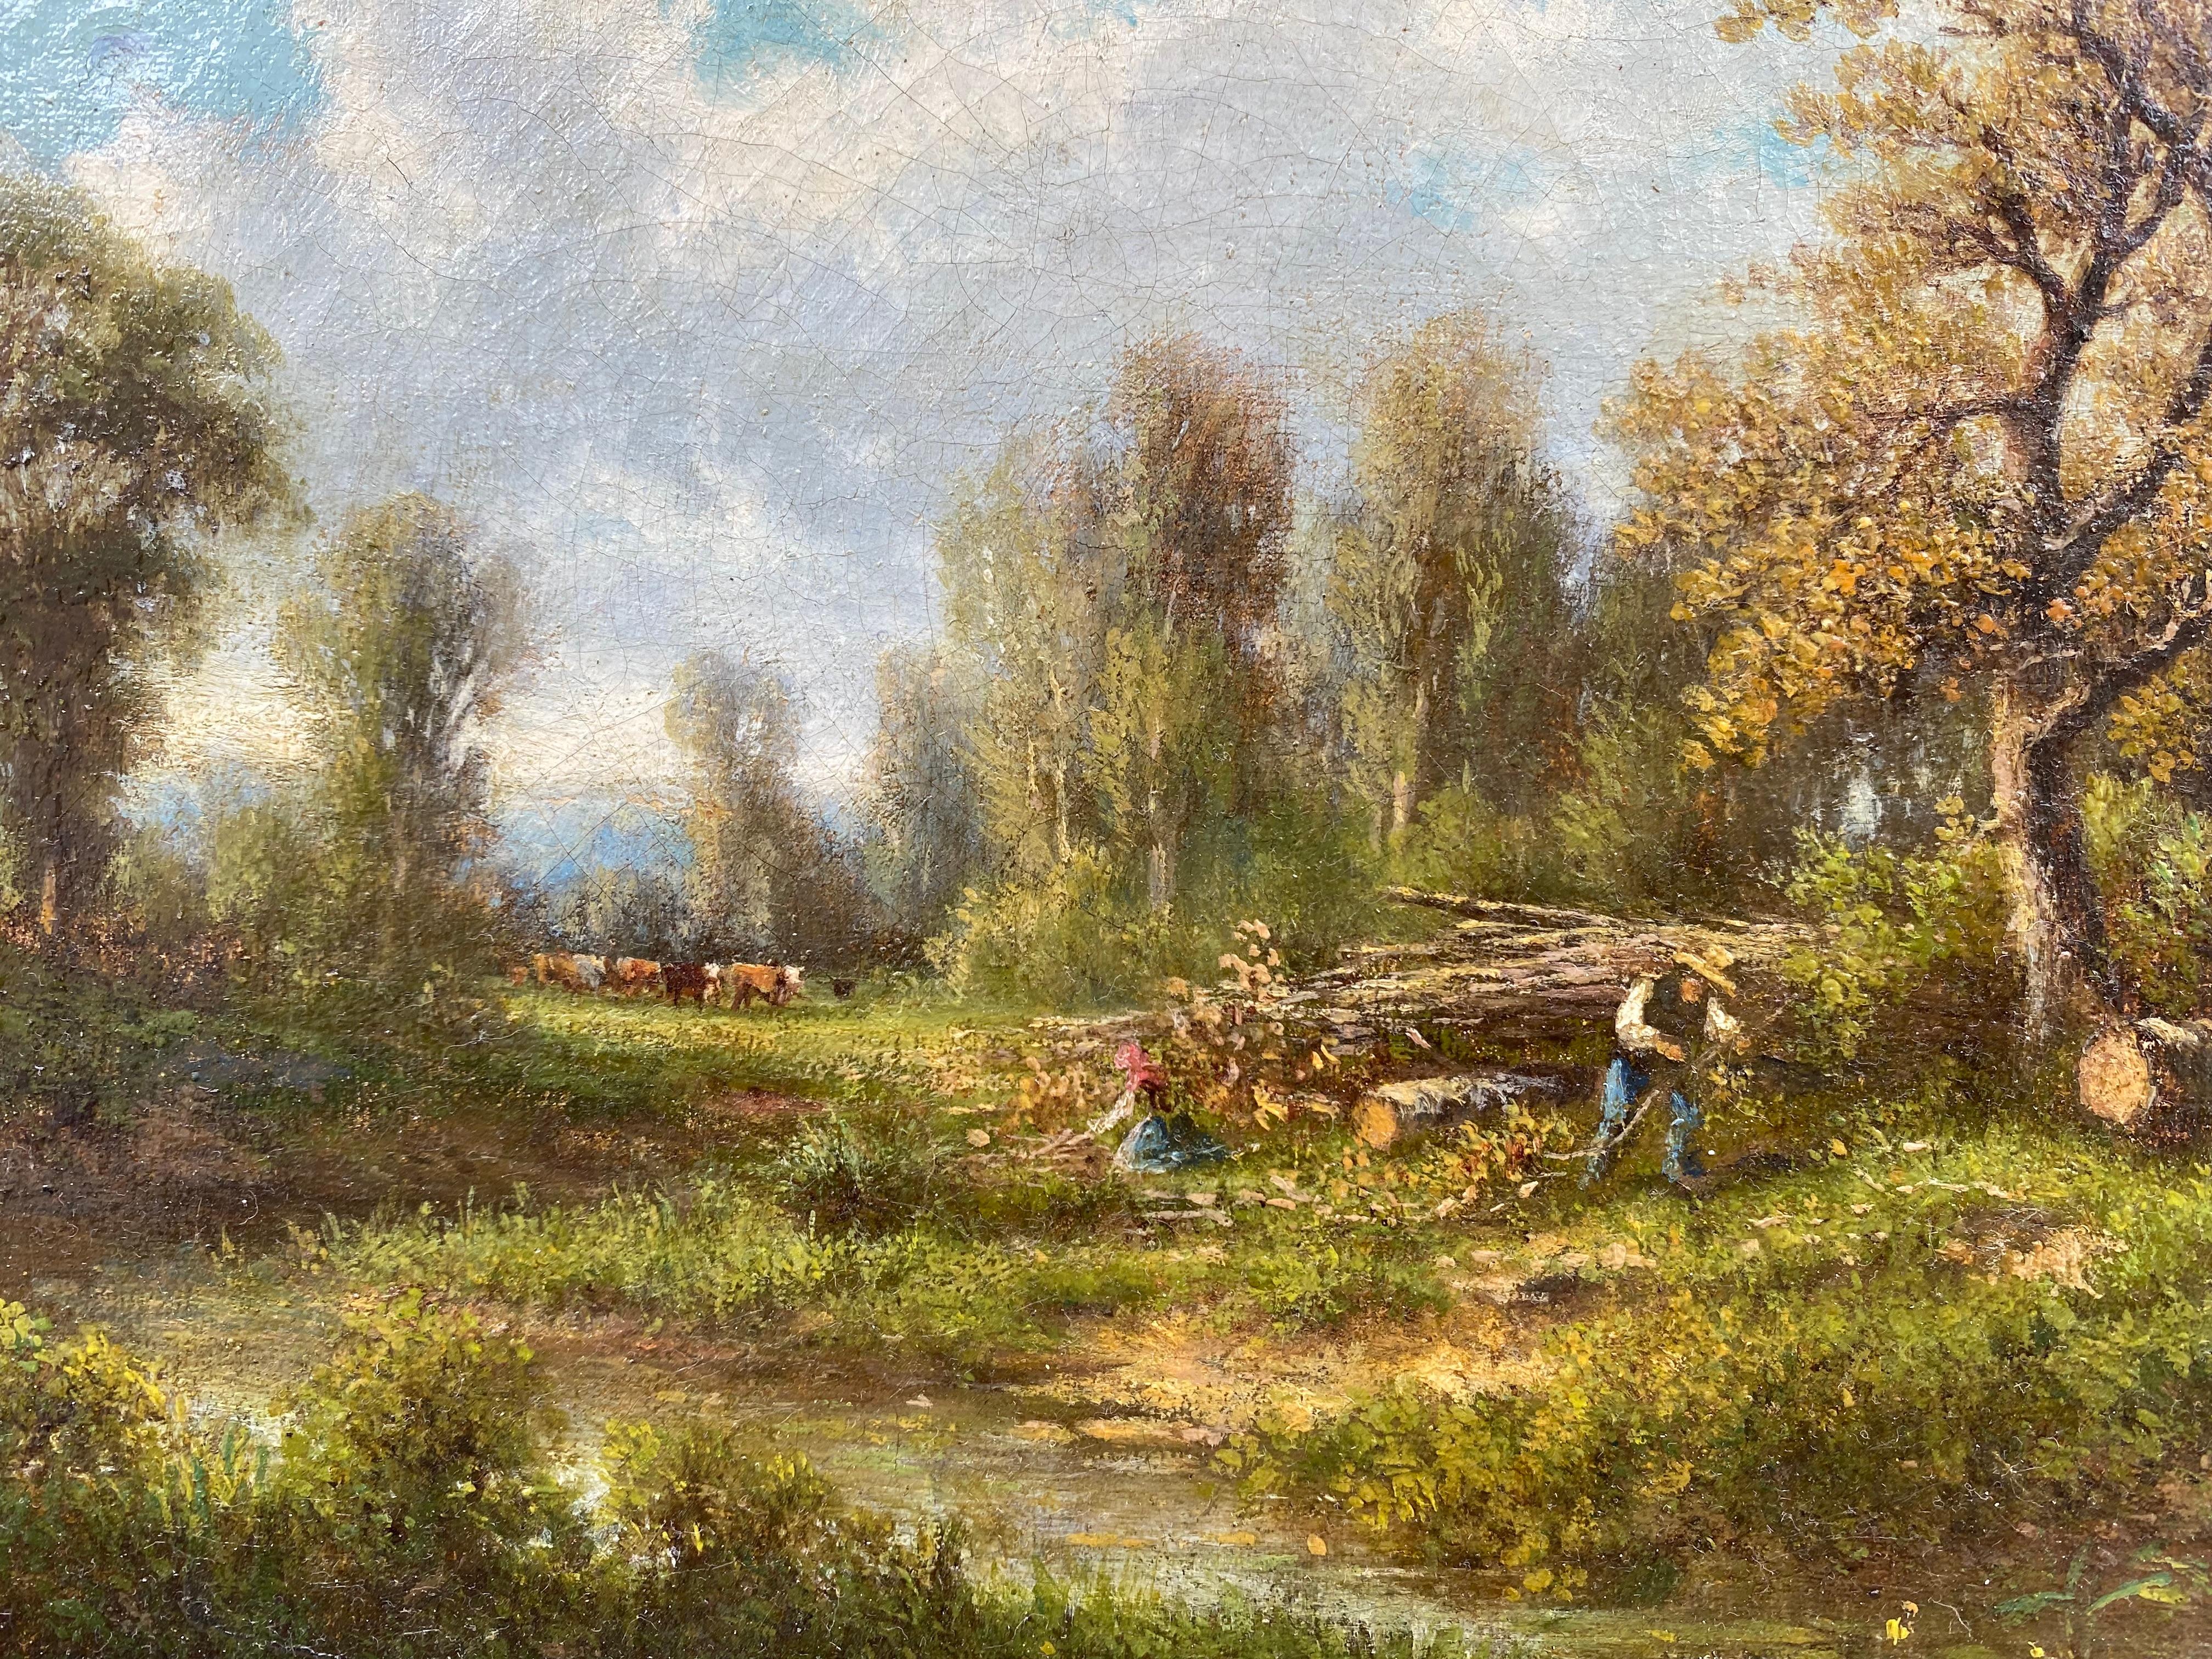 French 19th Century Barbizon painting rural scene with figures gathering wood  - Barbizon School Painting by Théodore Ghirardi